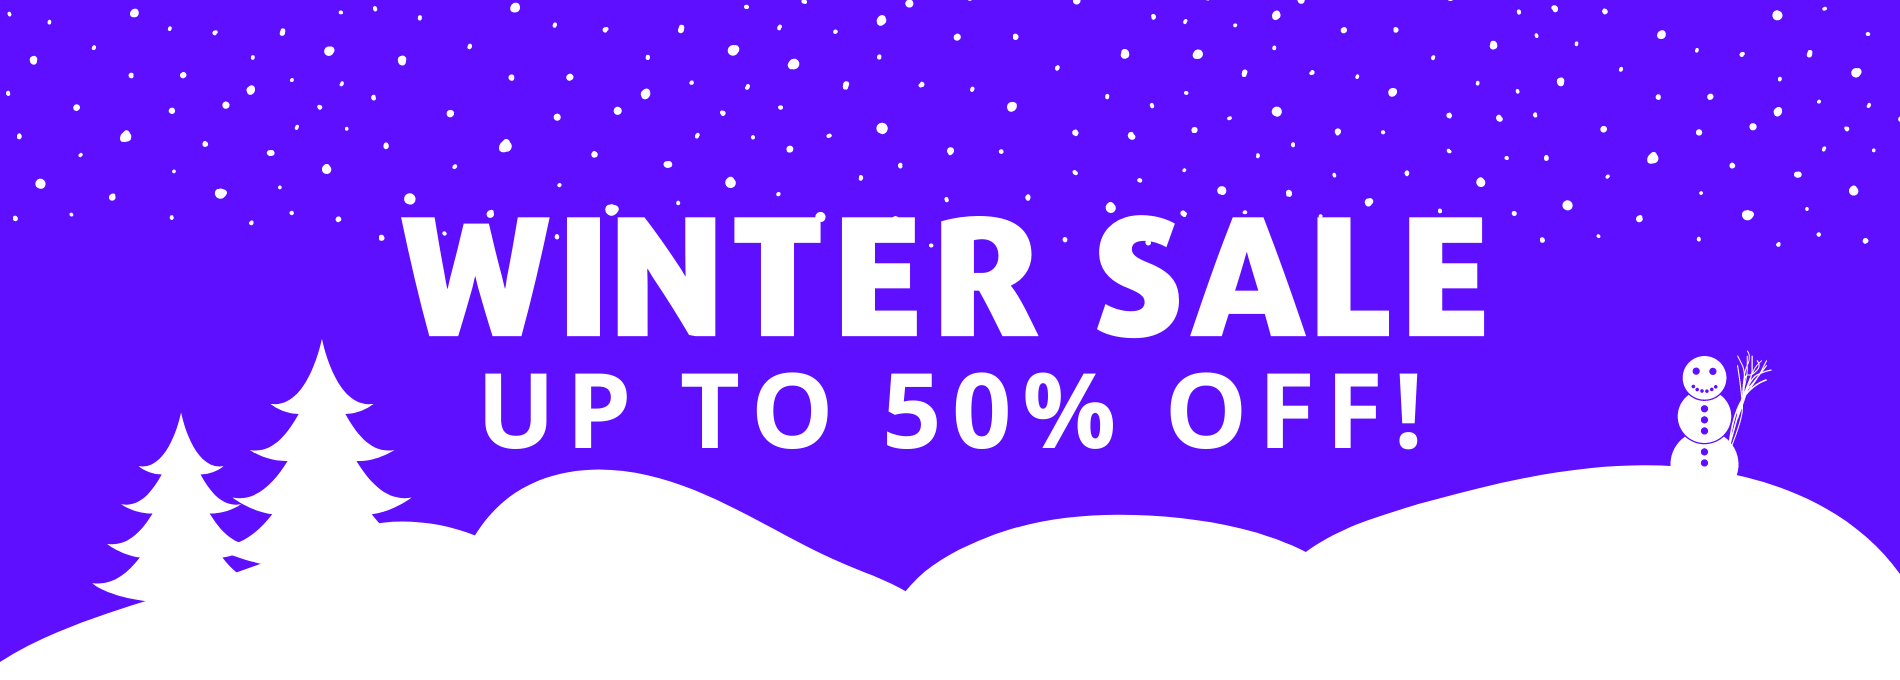 Winter sales up to 50%